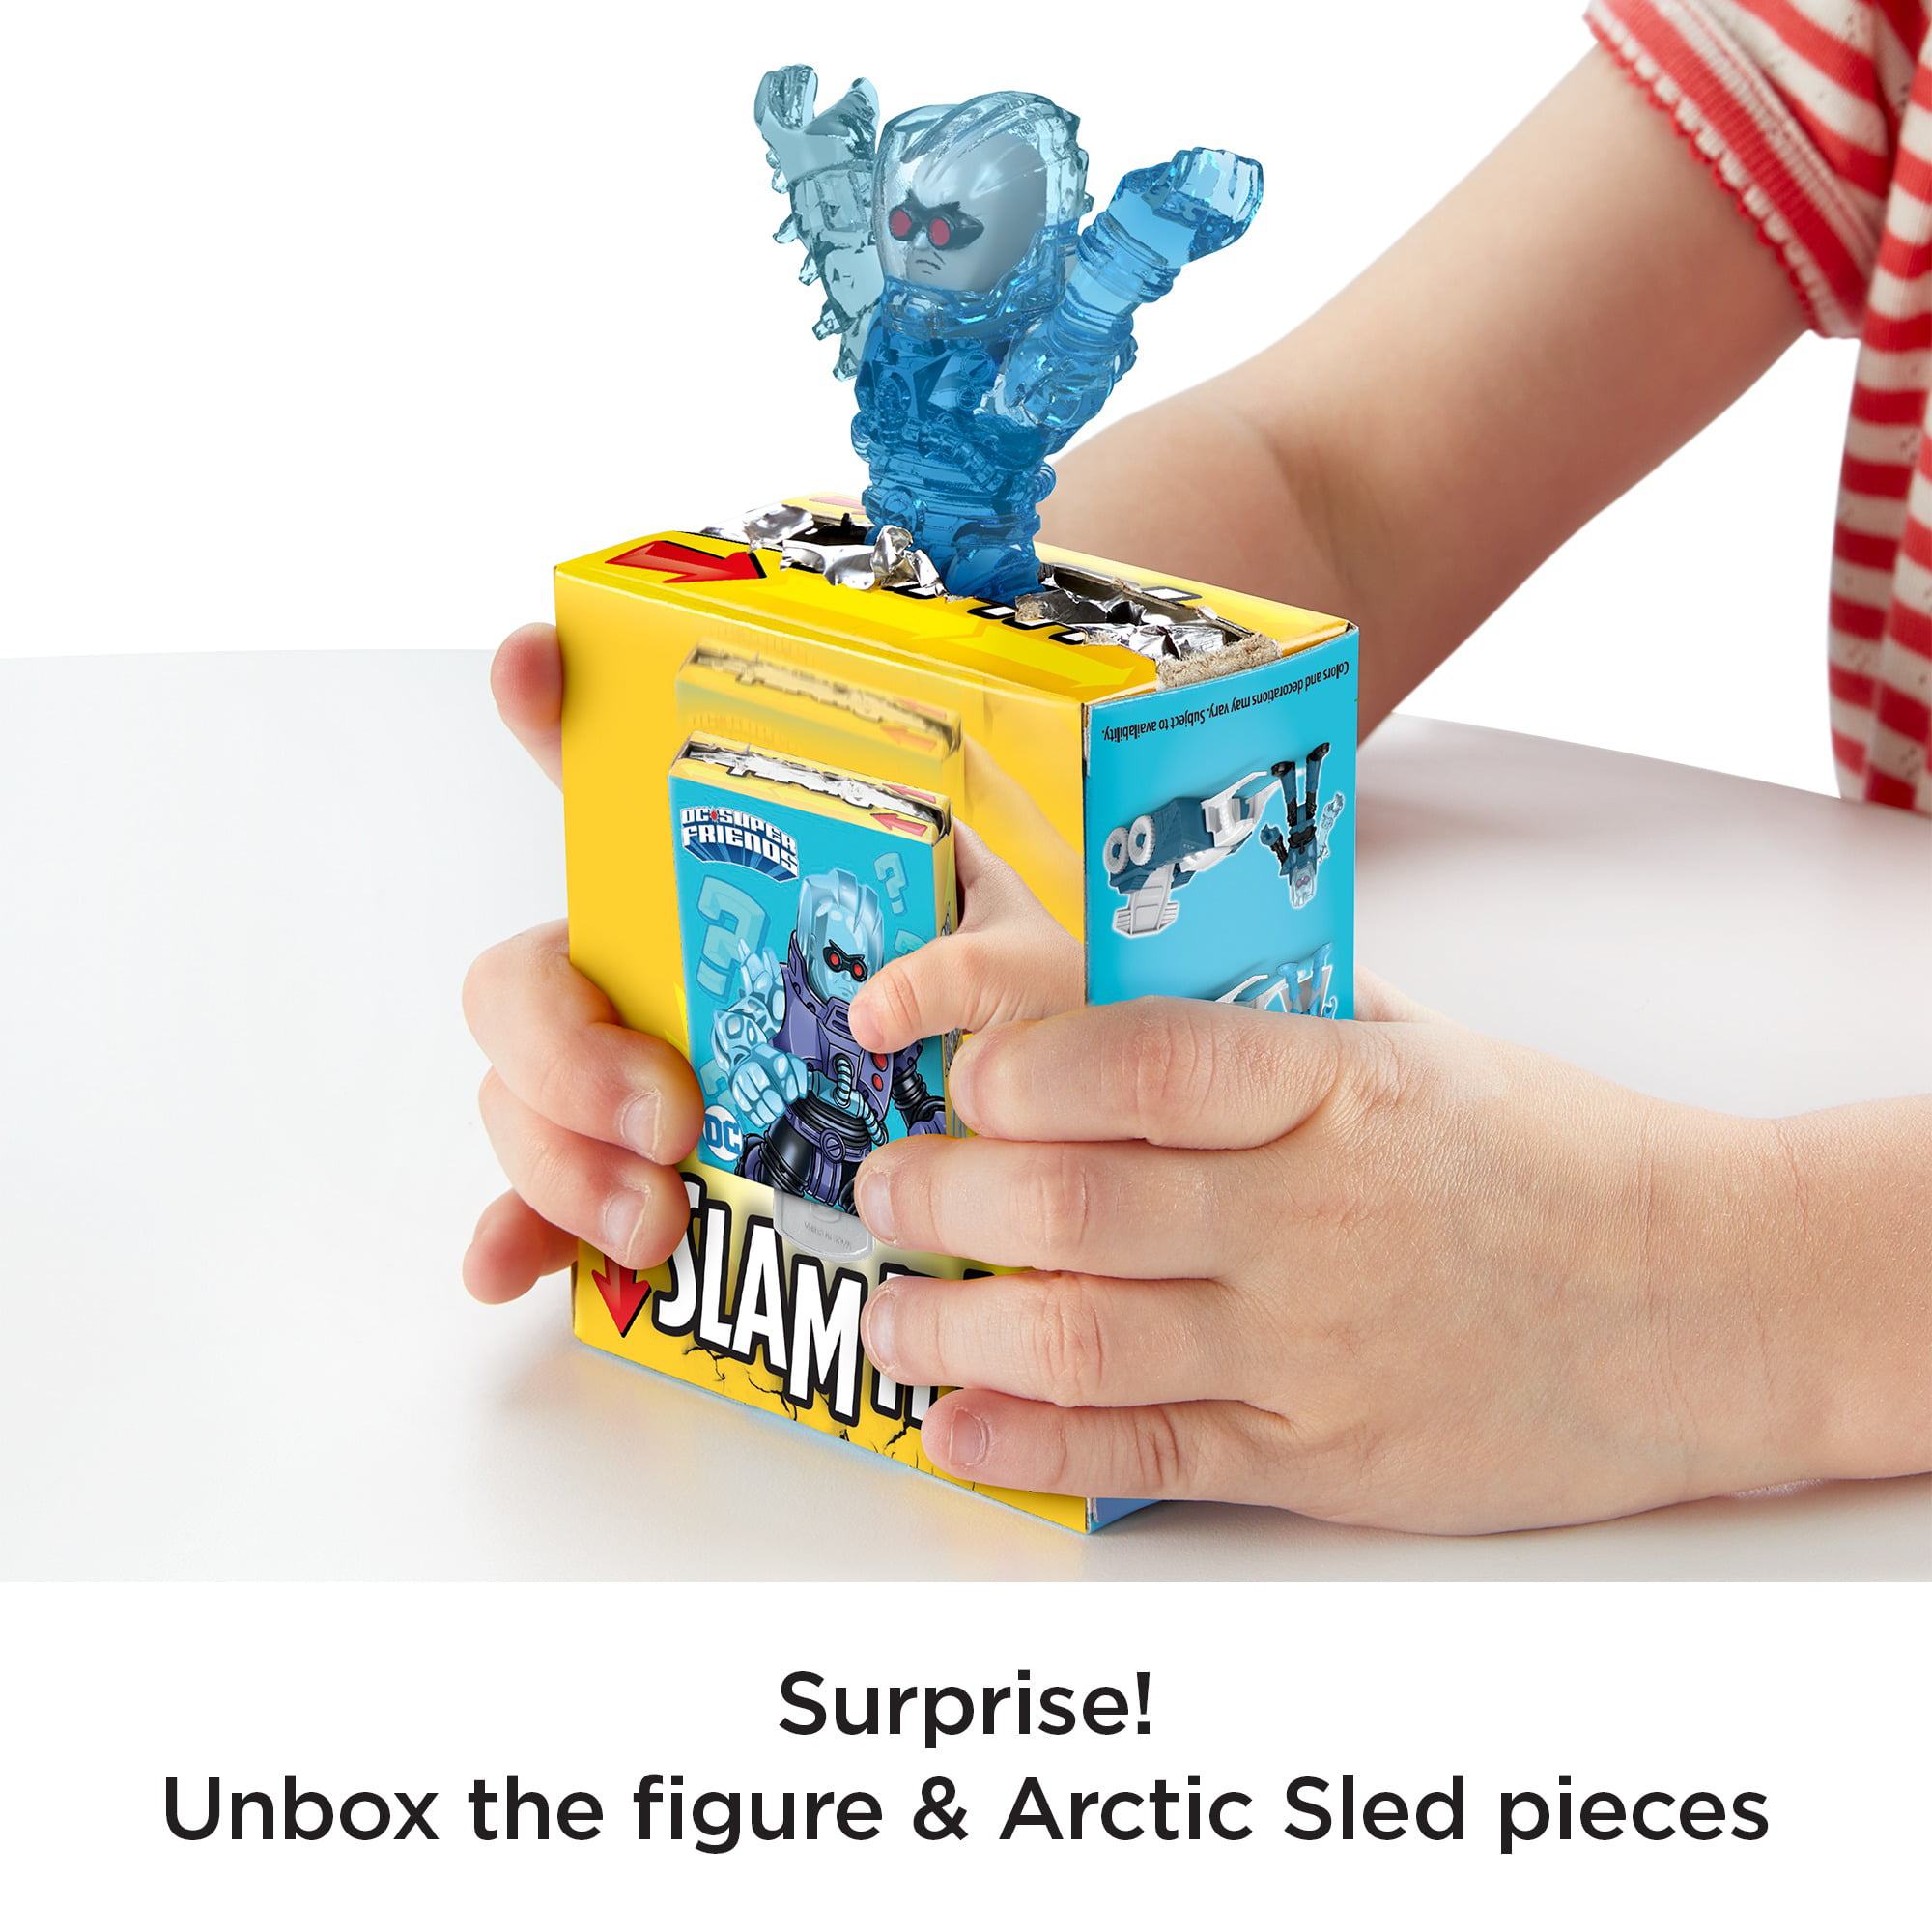 New Fisher-Price Imaginext Slammers Ice with Artic Sled DC Super Friends 